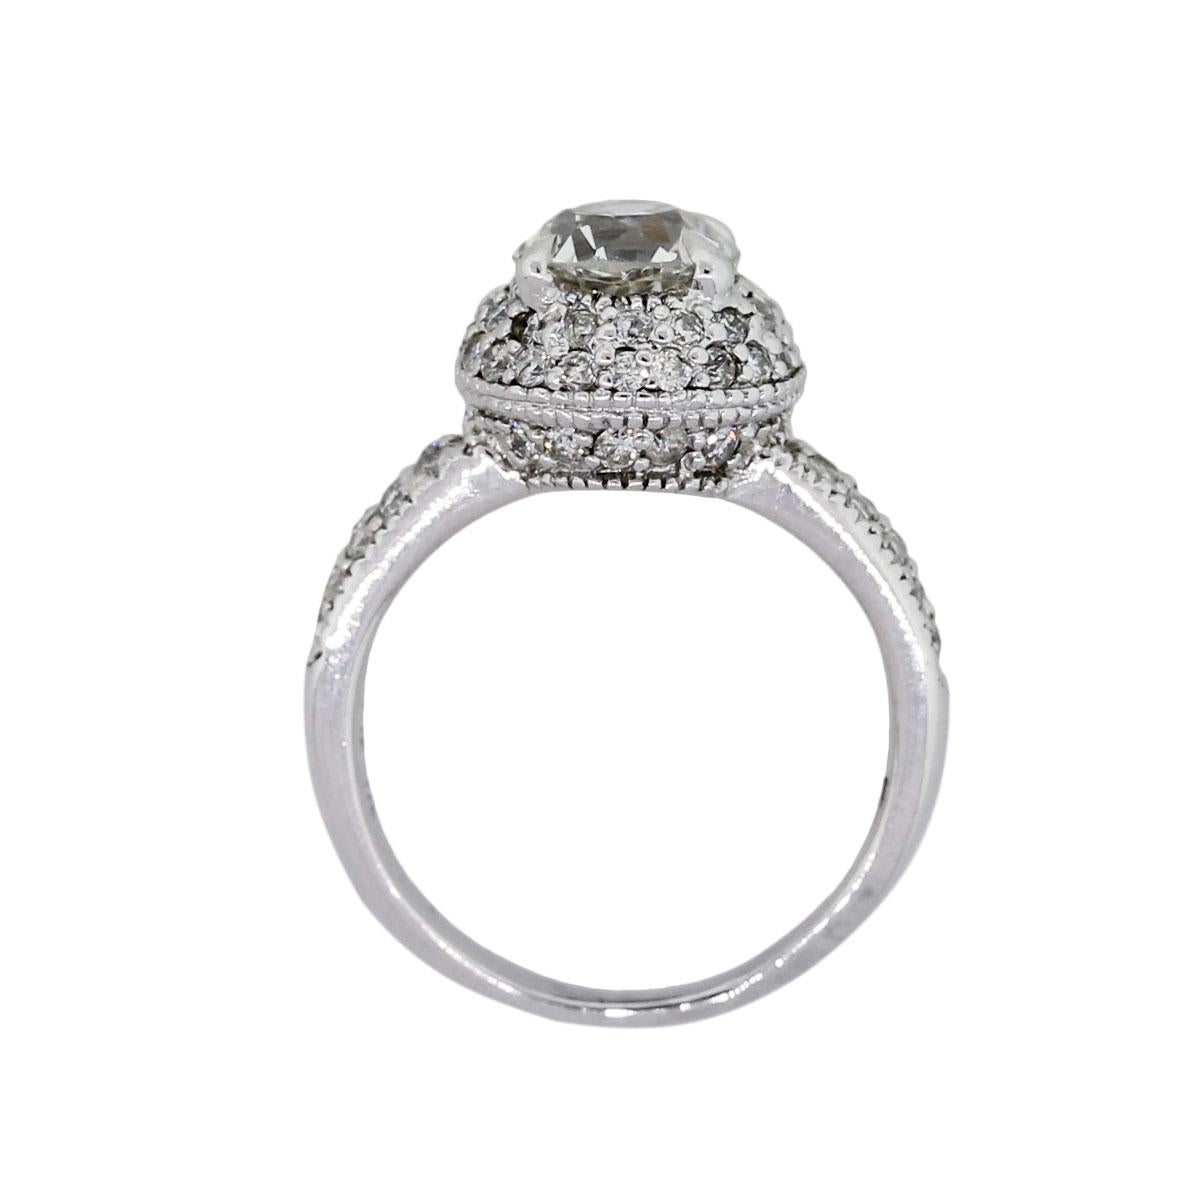 Material: 18k White Gold
Main Diamond Details: Old European round diamond approximately 1.30ct. Diamond is J in color and SI1 in clarity
Adjacent Diamond Details: Approximately 1ctw of round brilliant diamonds. Diamonds are G/H in color and VS in